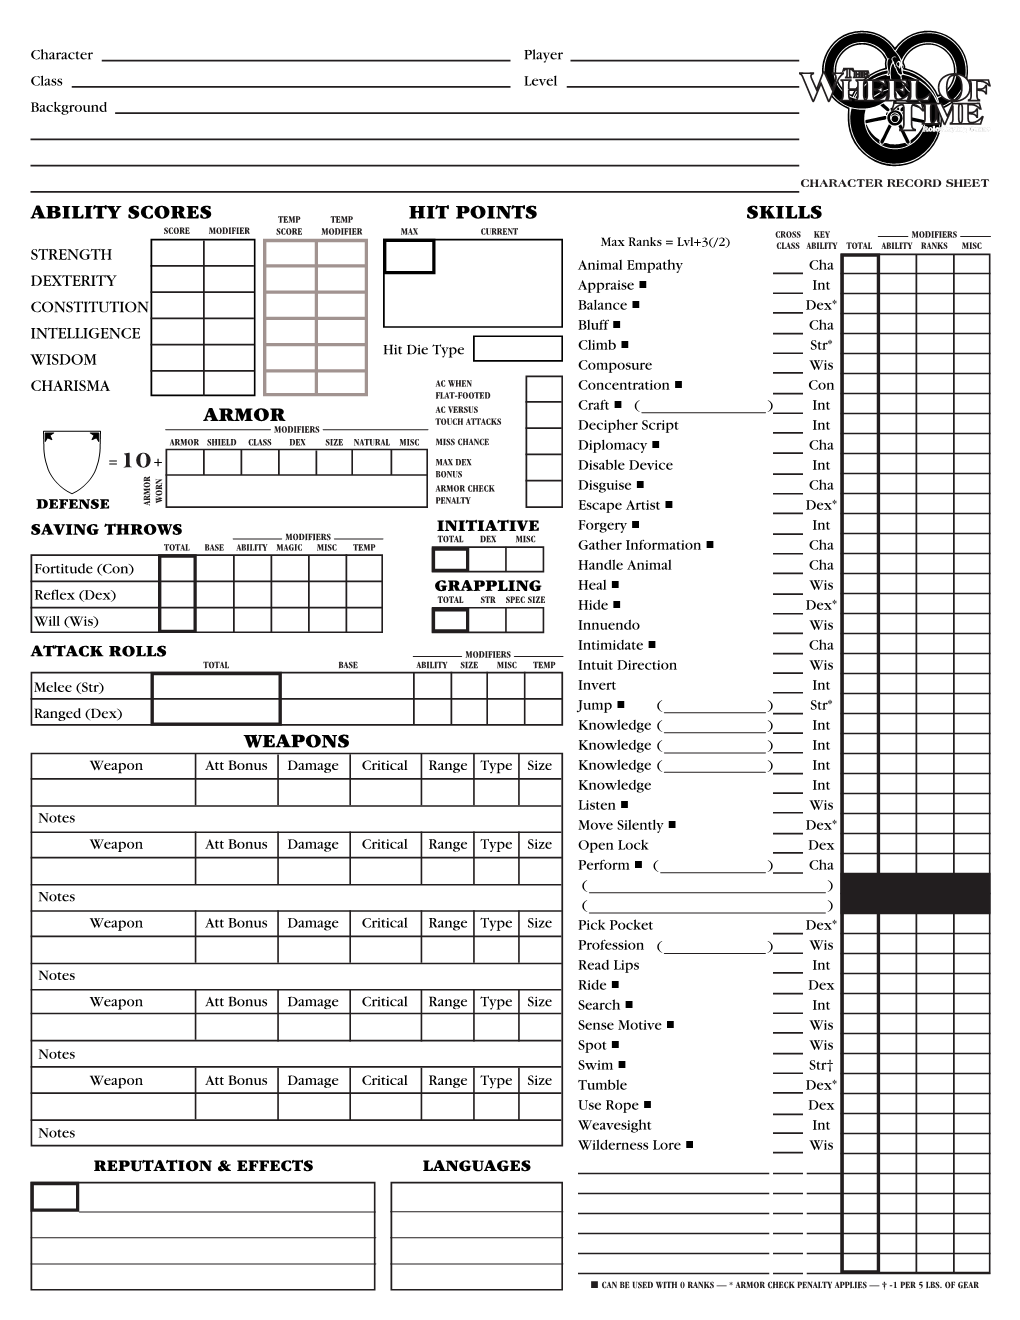 Wheel of Time Character Sheet V1.0 11/01 by Patrick M